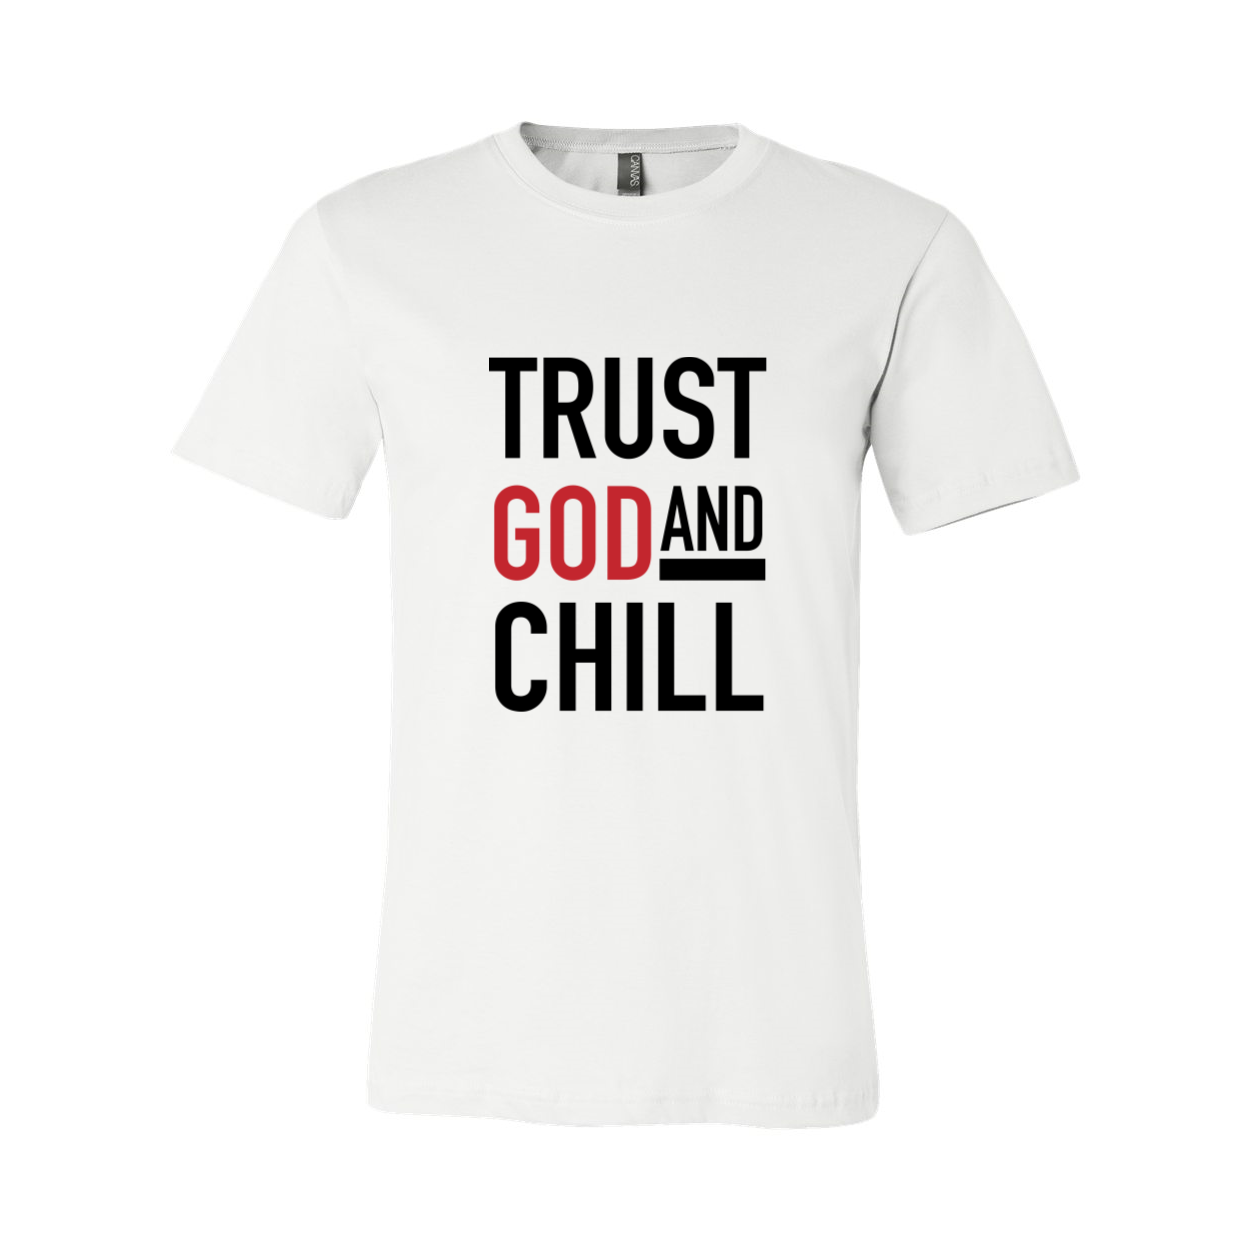 Trust God and Chill Tee